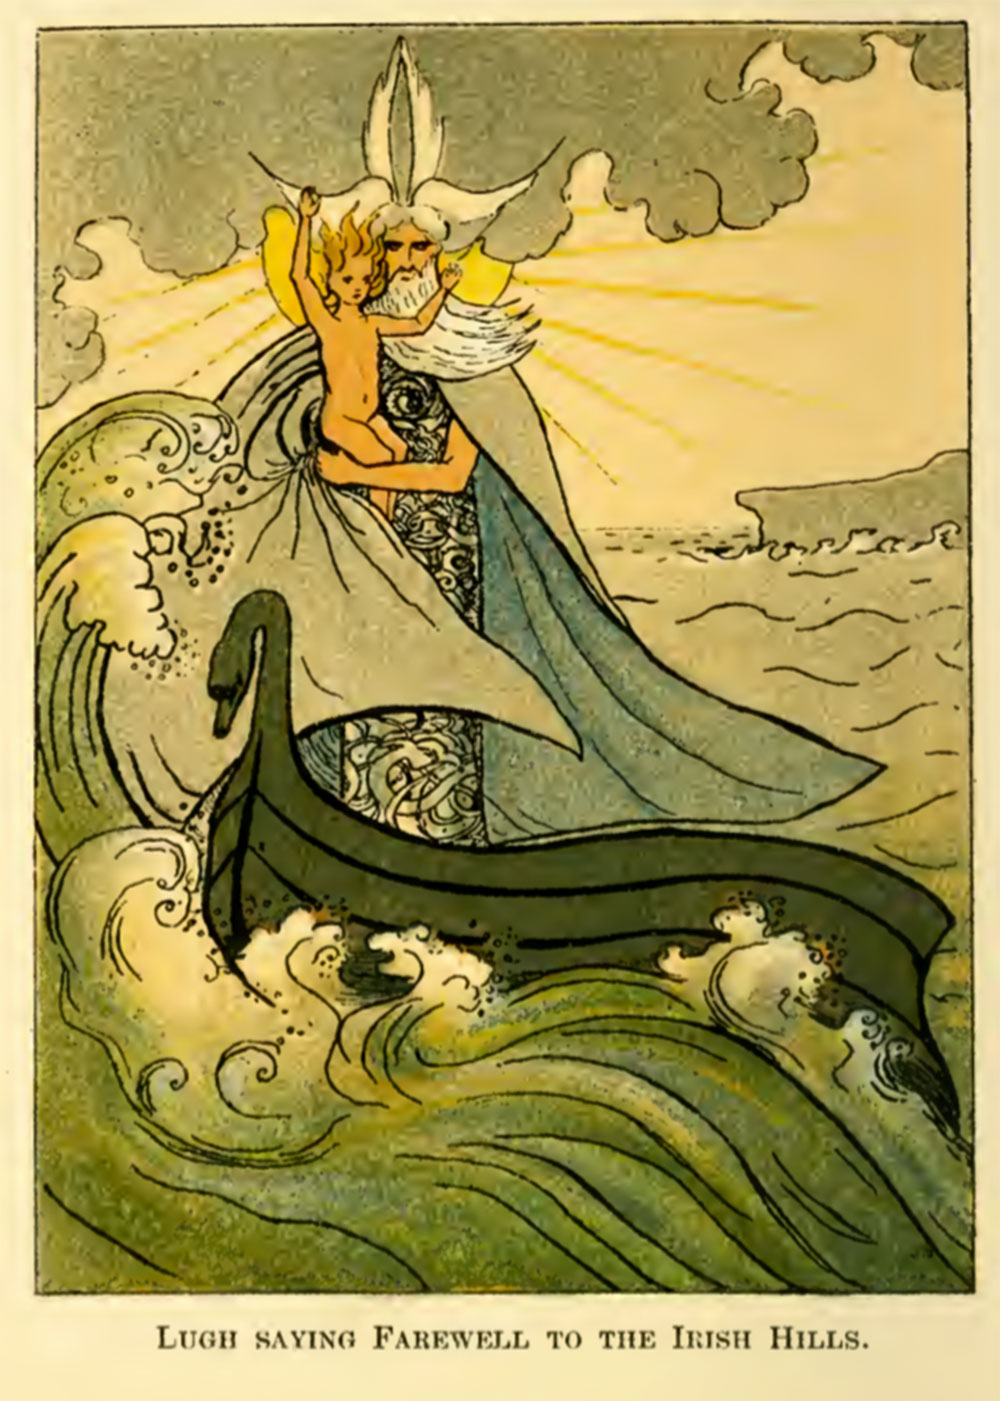 The Rescue of Lugh by Manannan, illustration by Maude Gonne, 1909.